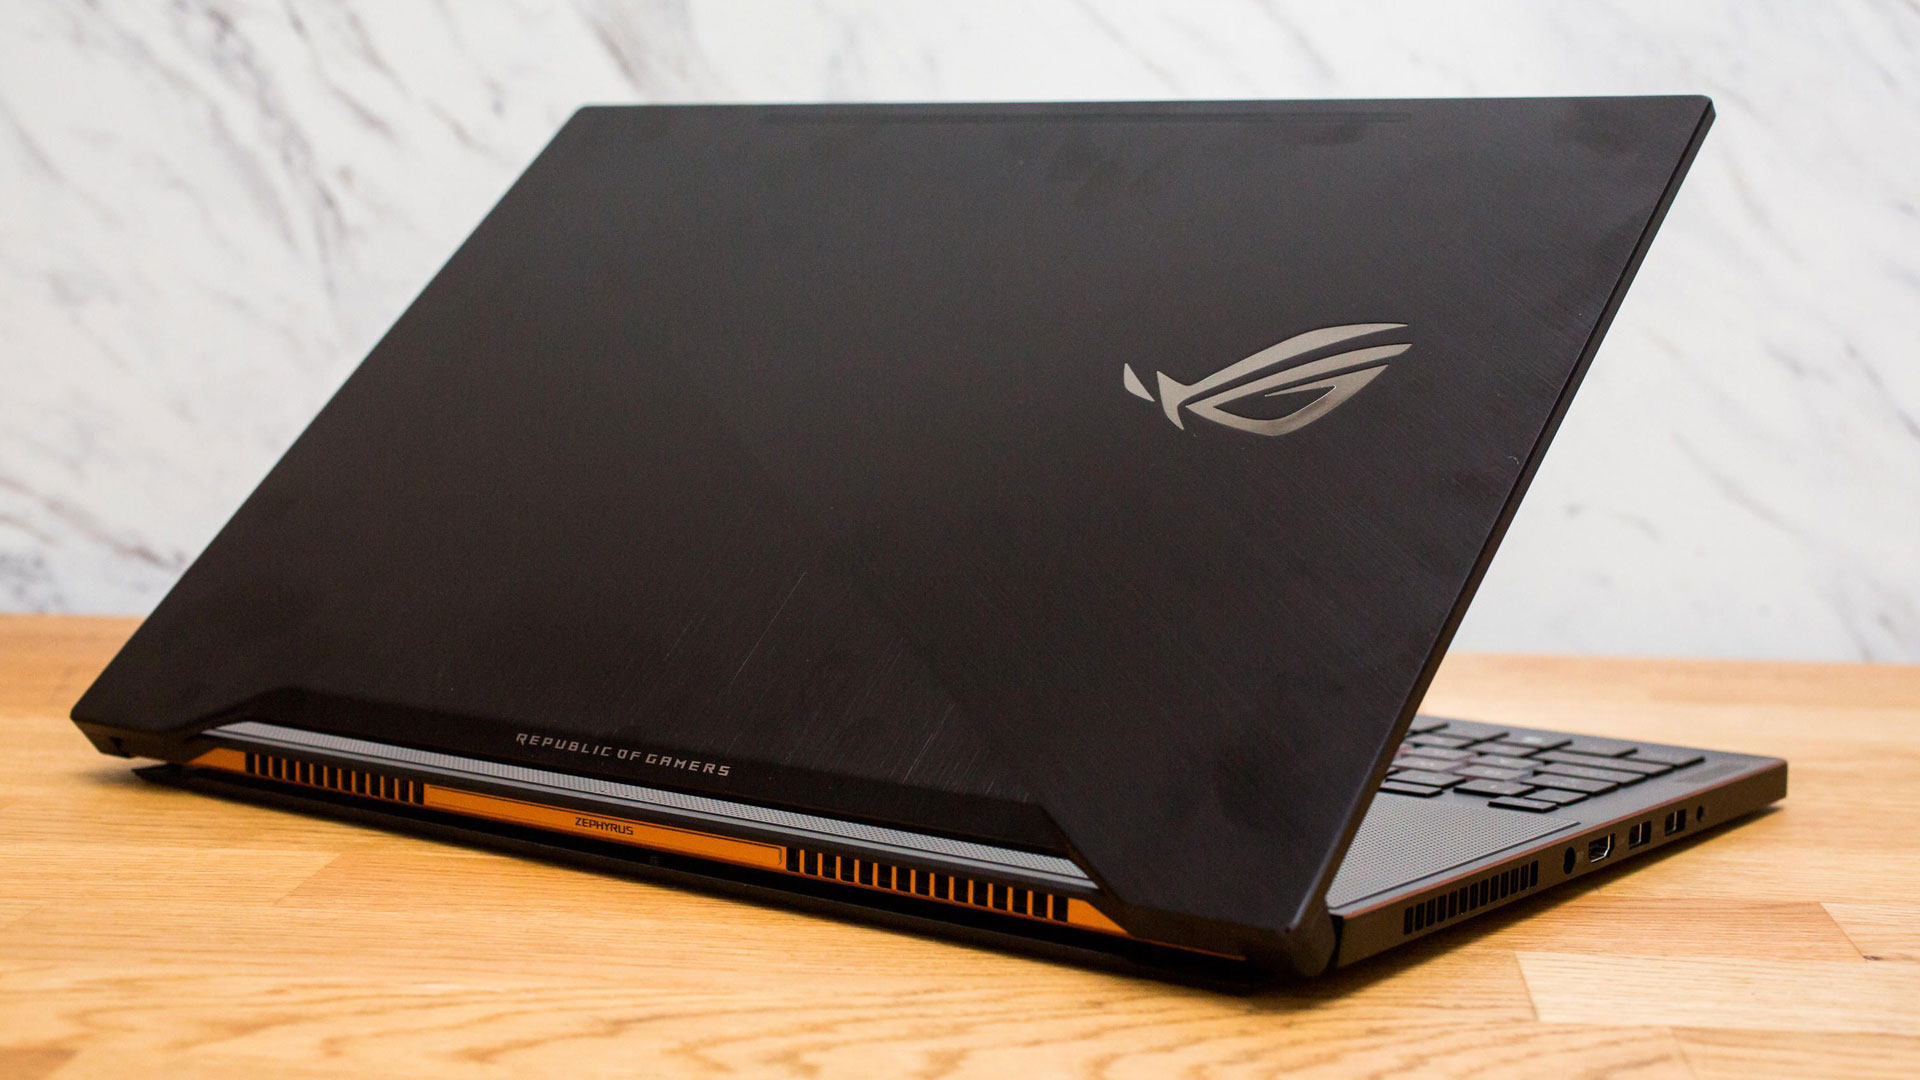 Gaming Laptops Buying Guide – Things to Check